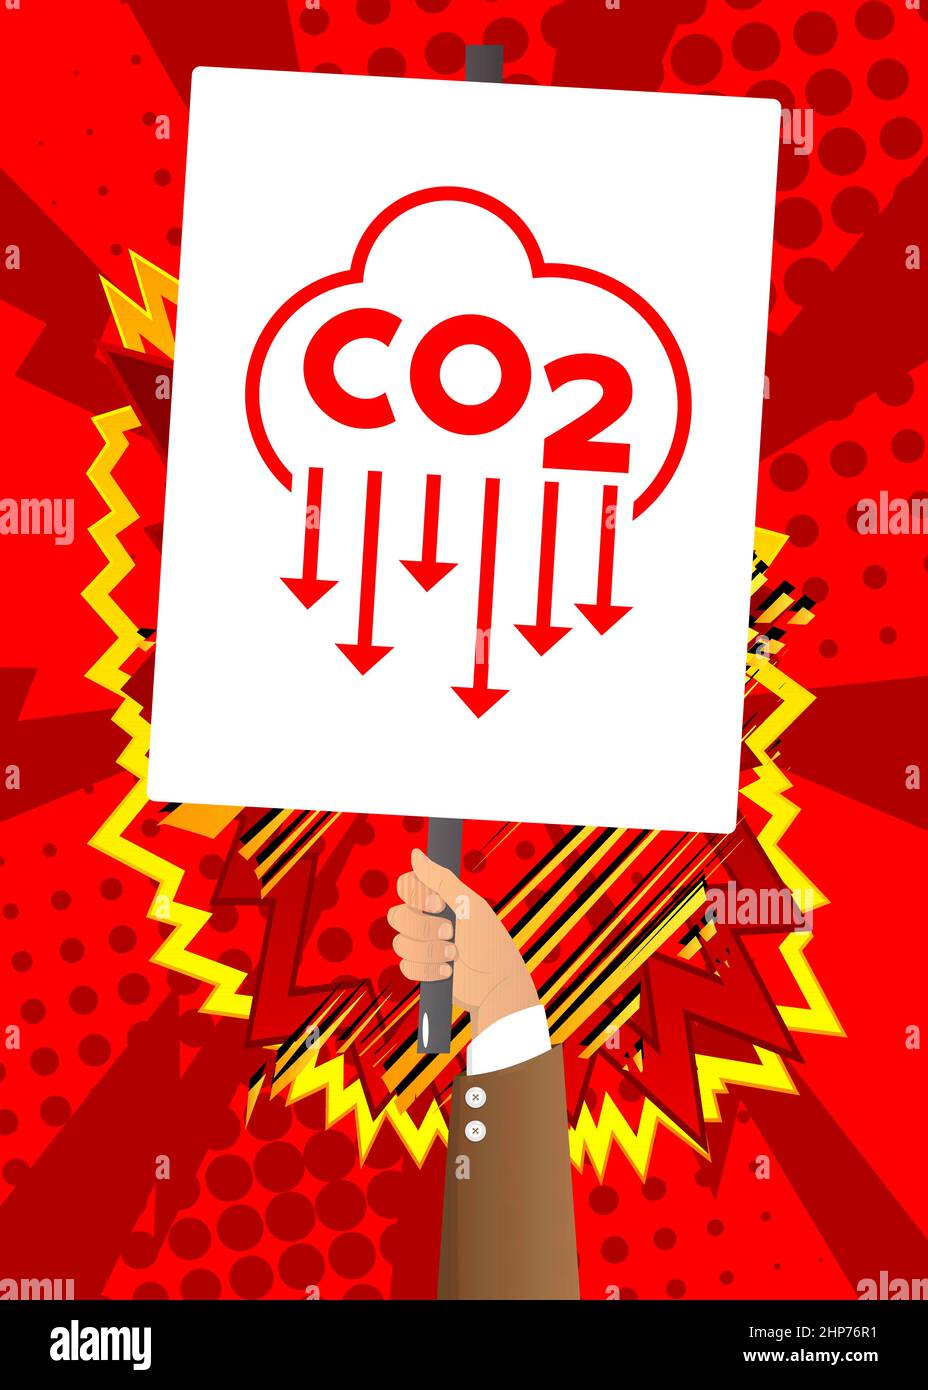 CO2 emission sign, Carbon dioxide icon Stock Vector